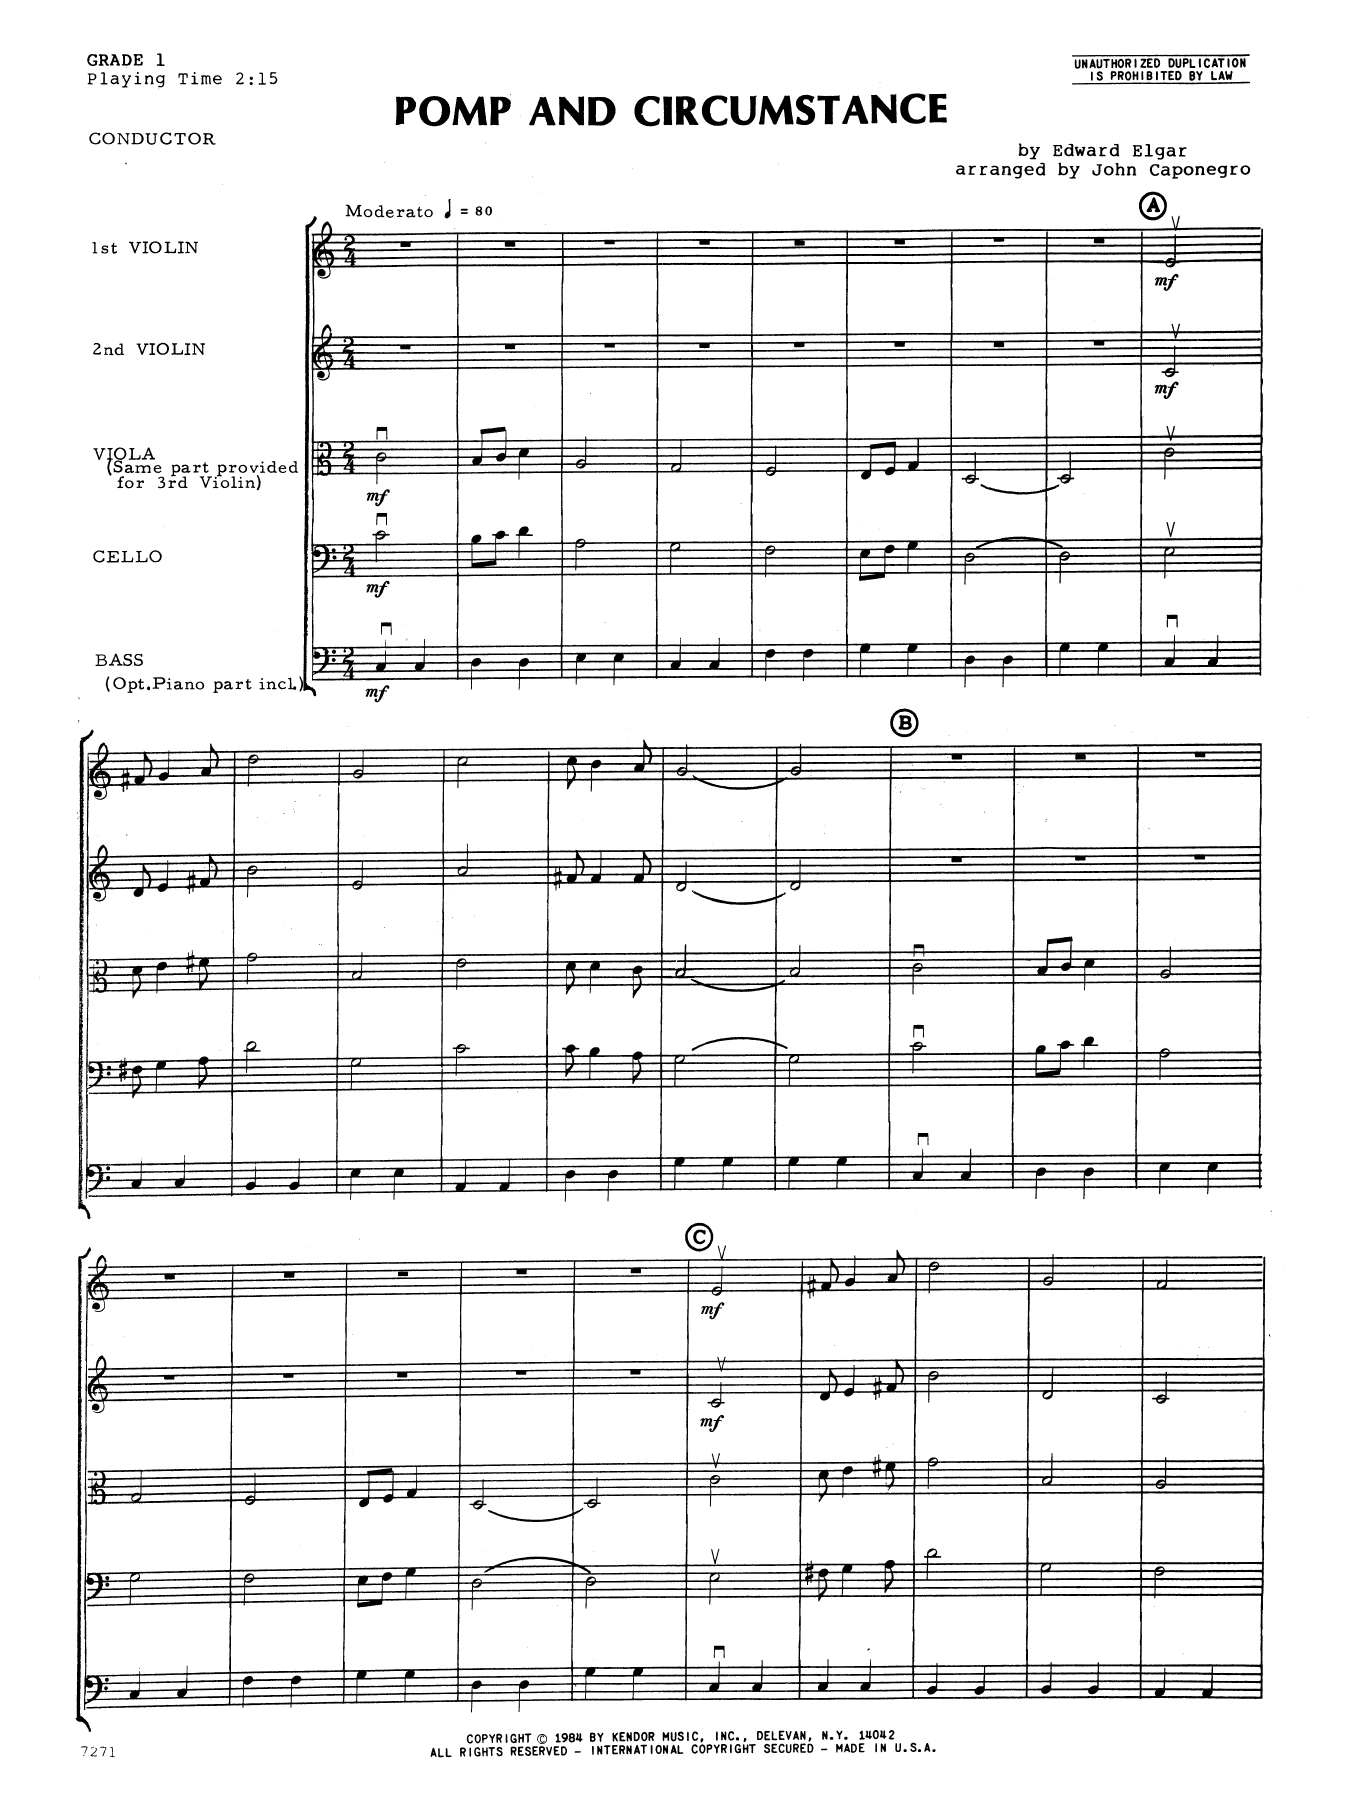 Download John Caponegro Pomp And Circumstance - Full Score Sheet Music